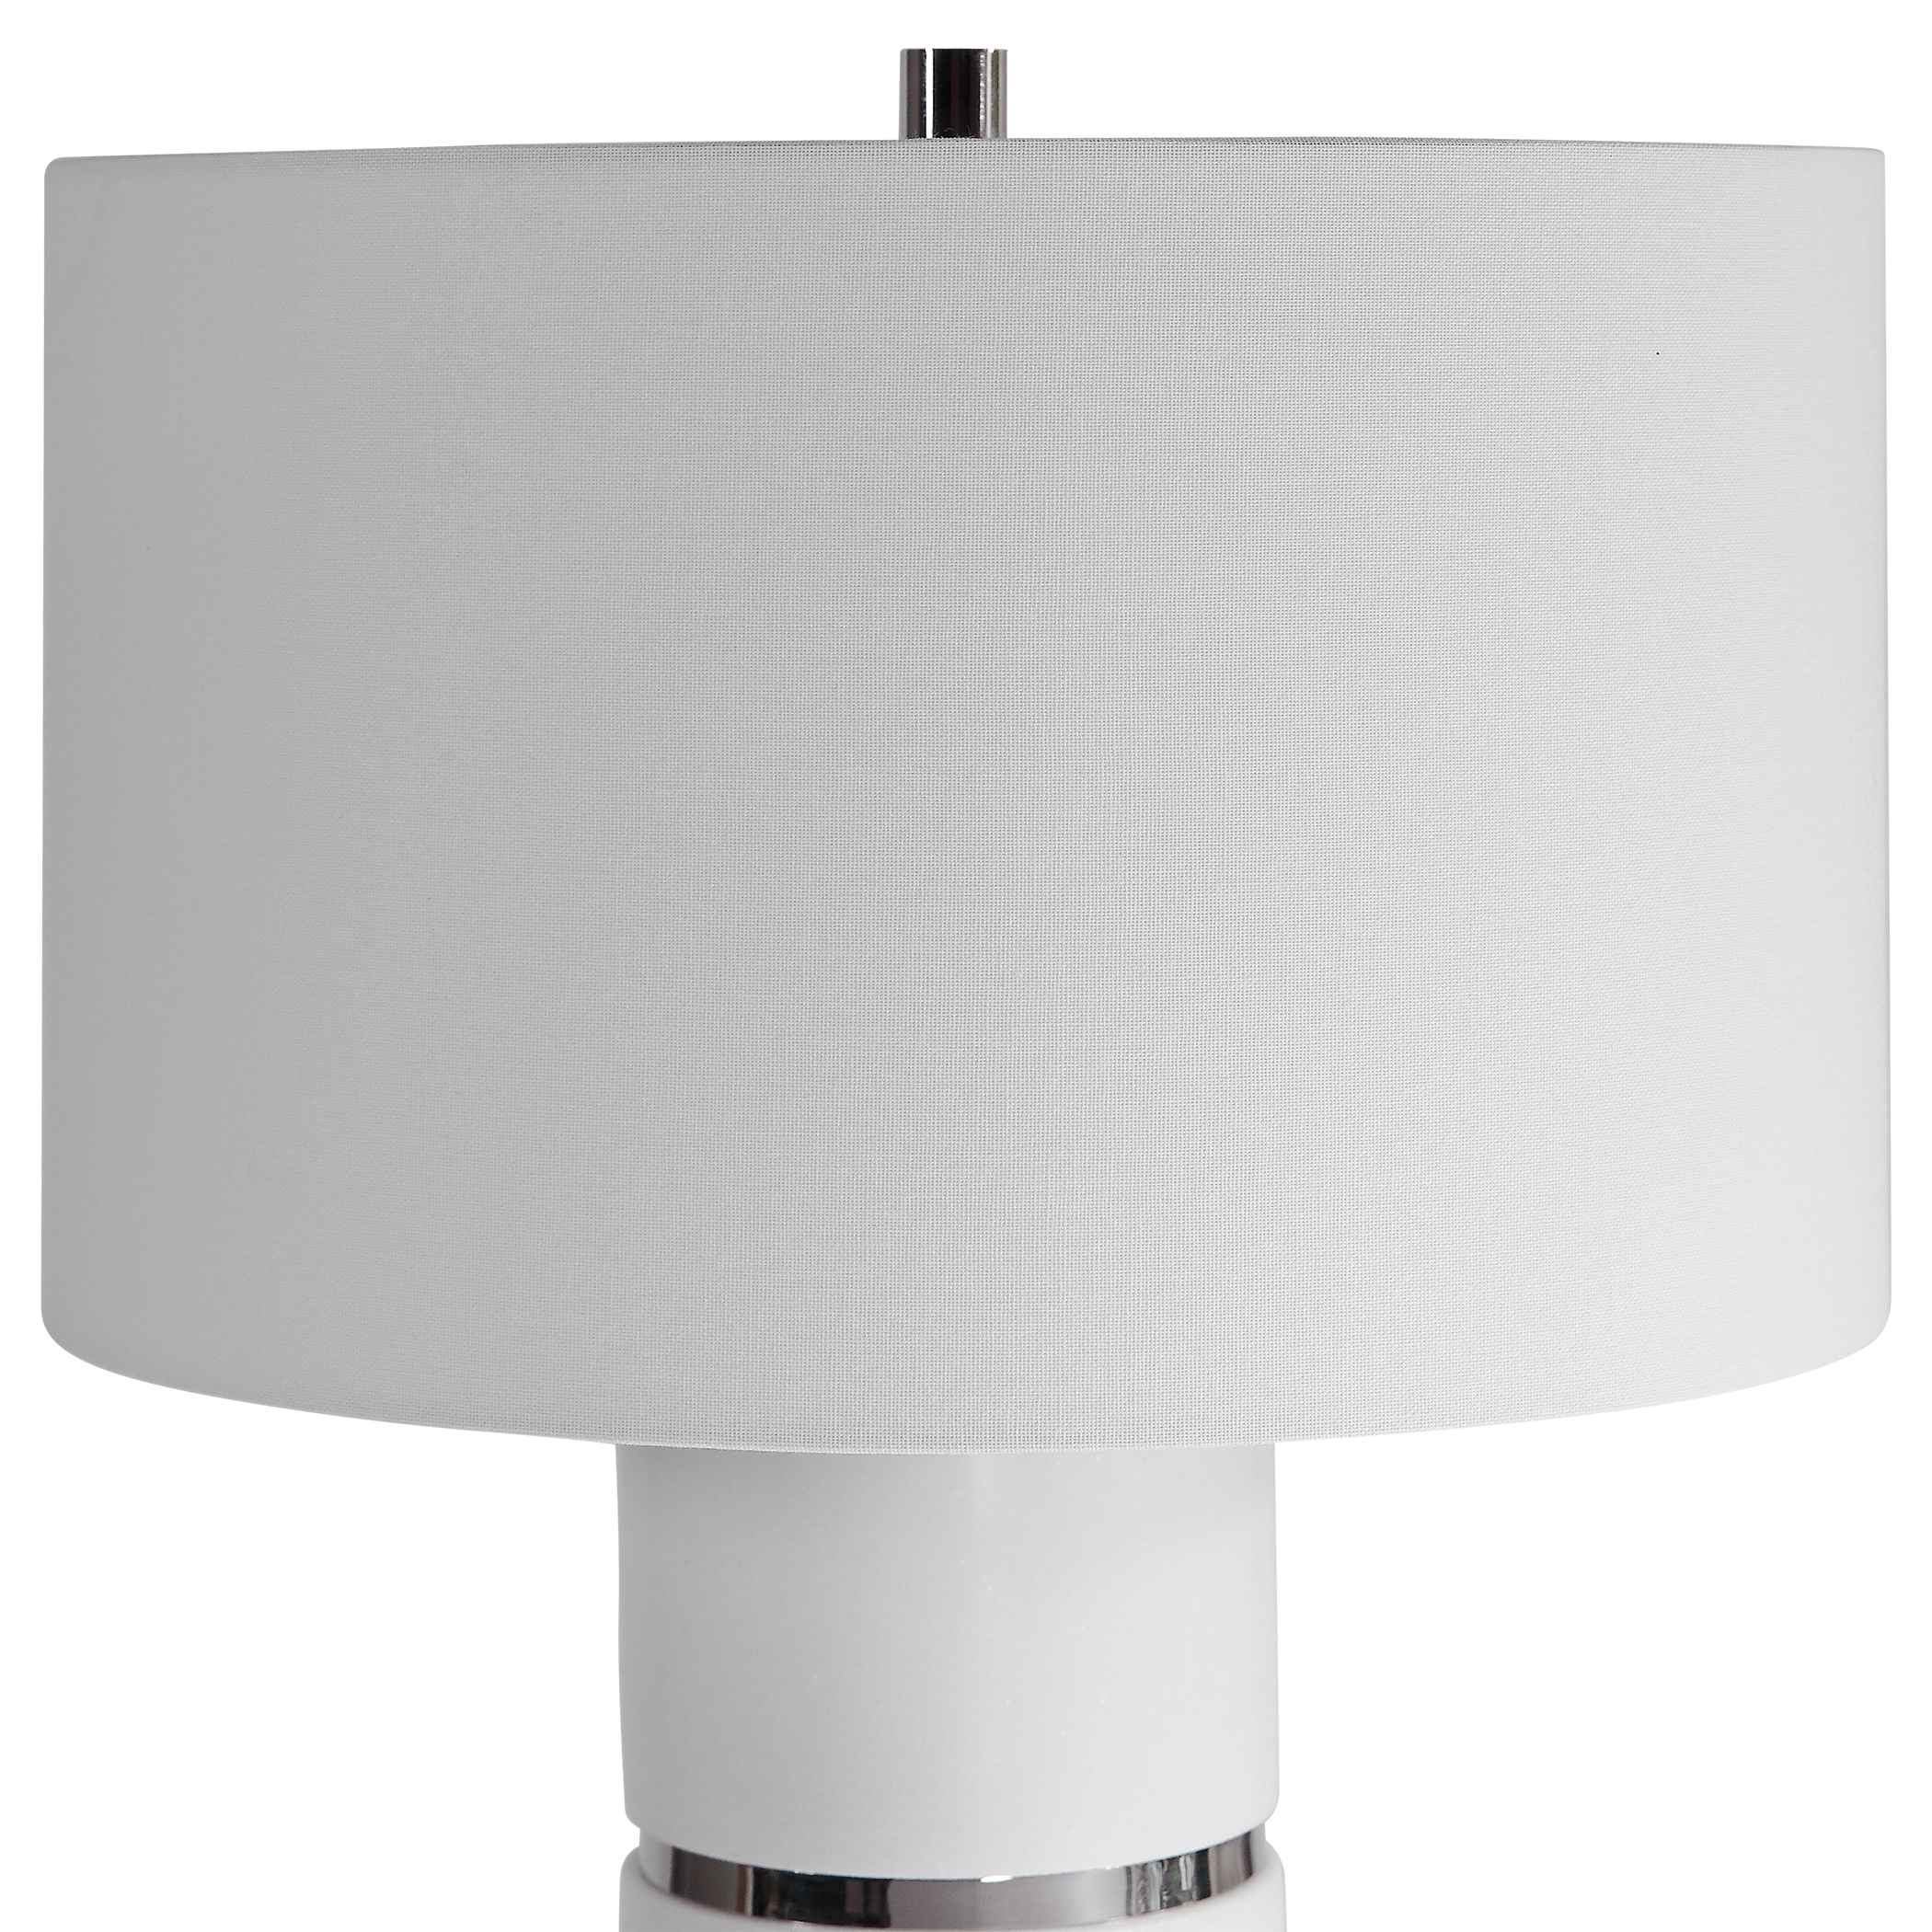 Grania White Marble Table Lamp - Image 4